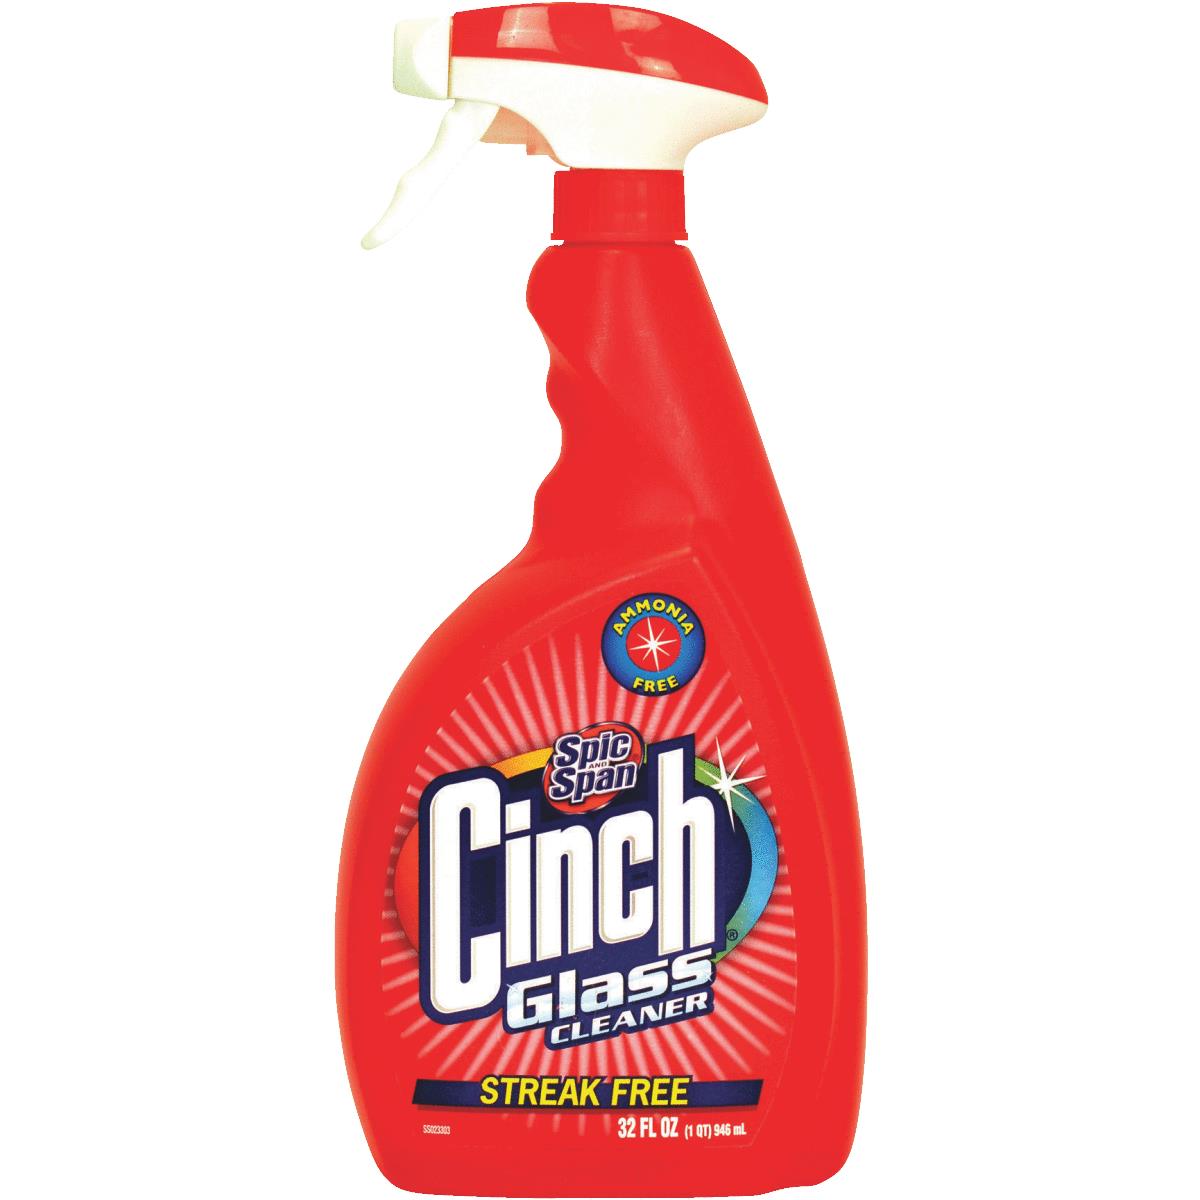 cinch glass cleaner